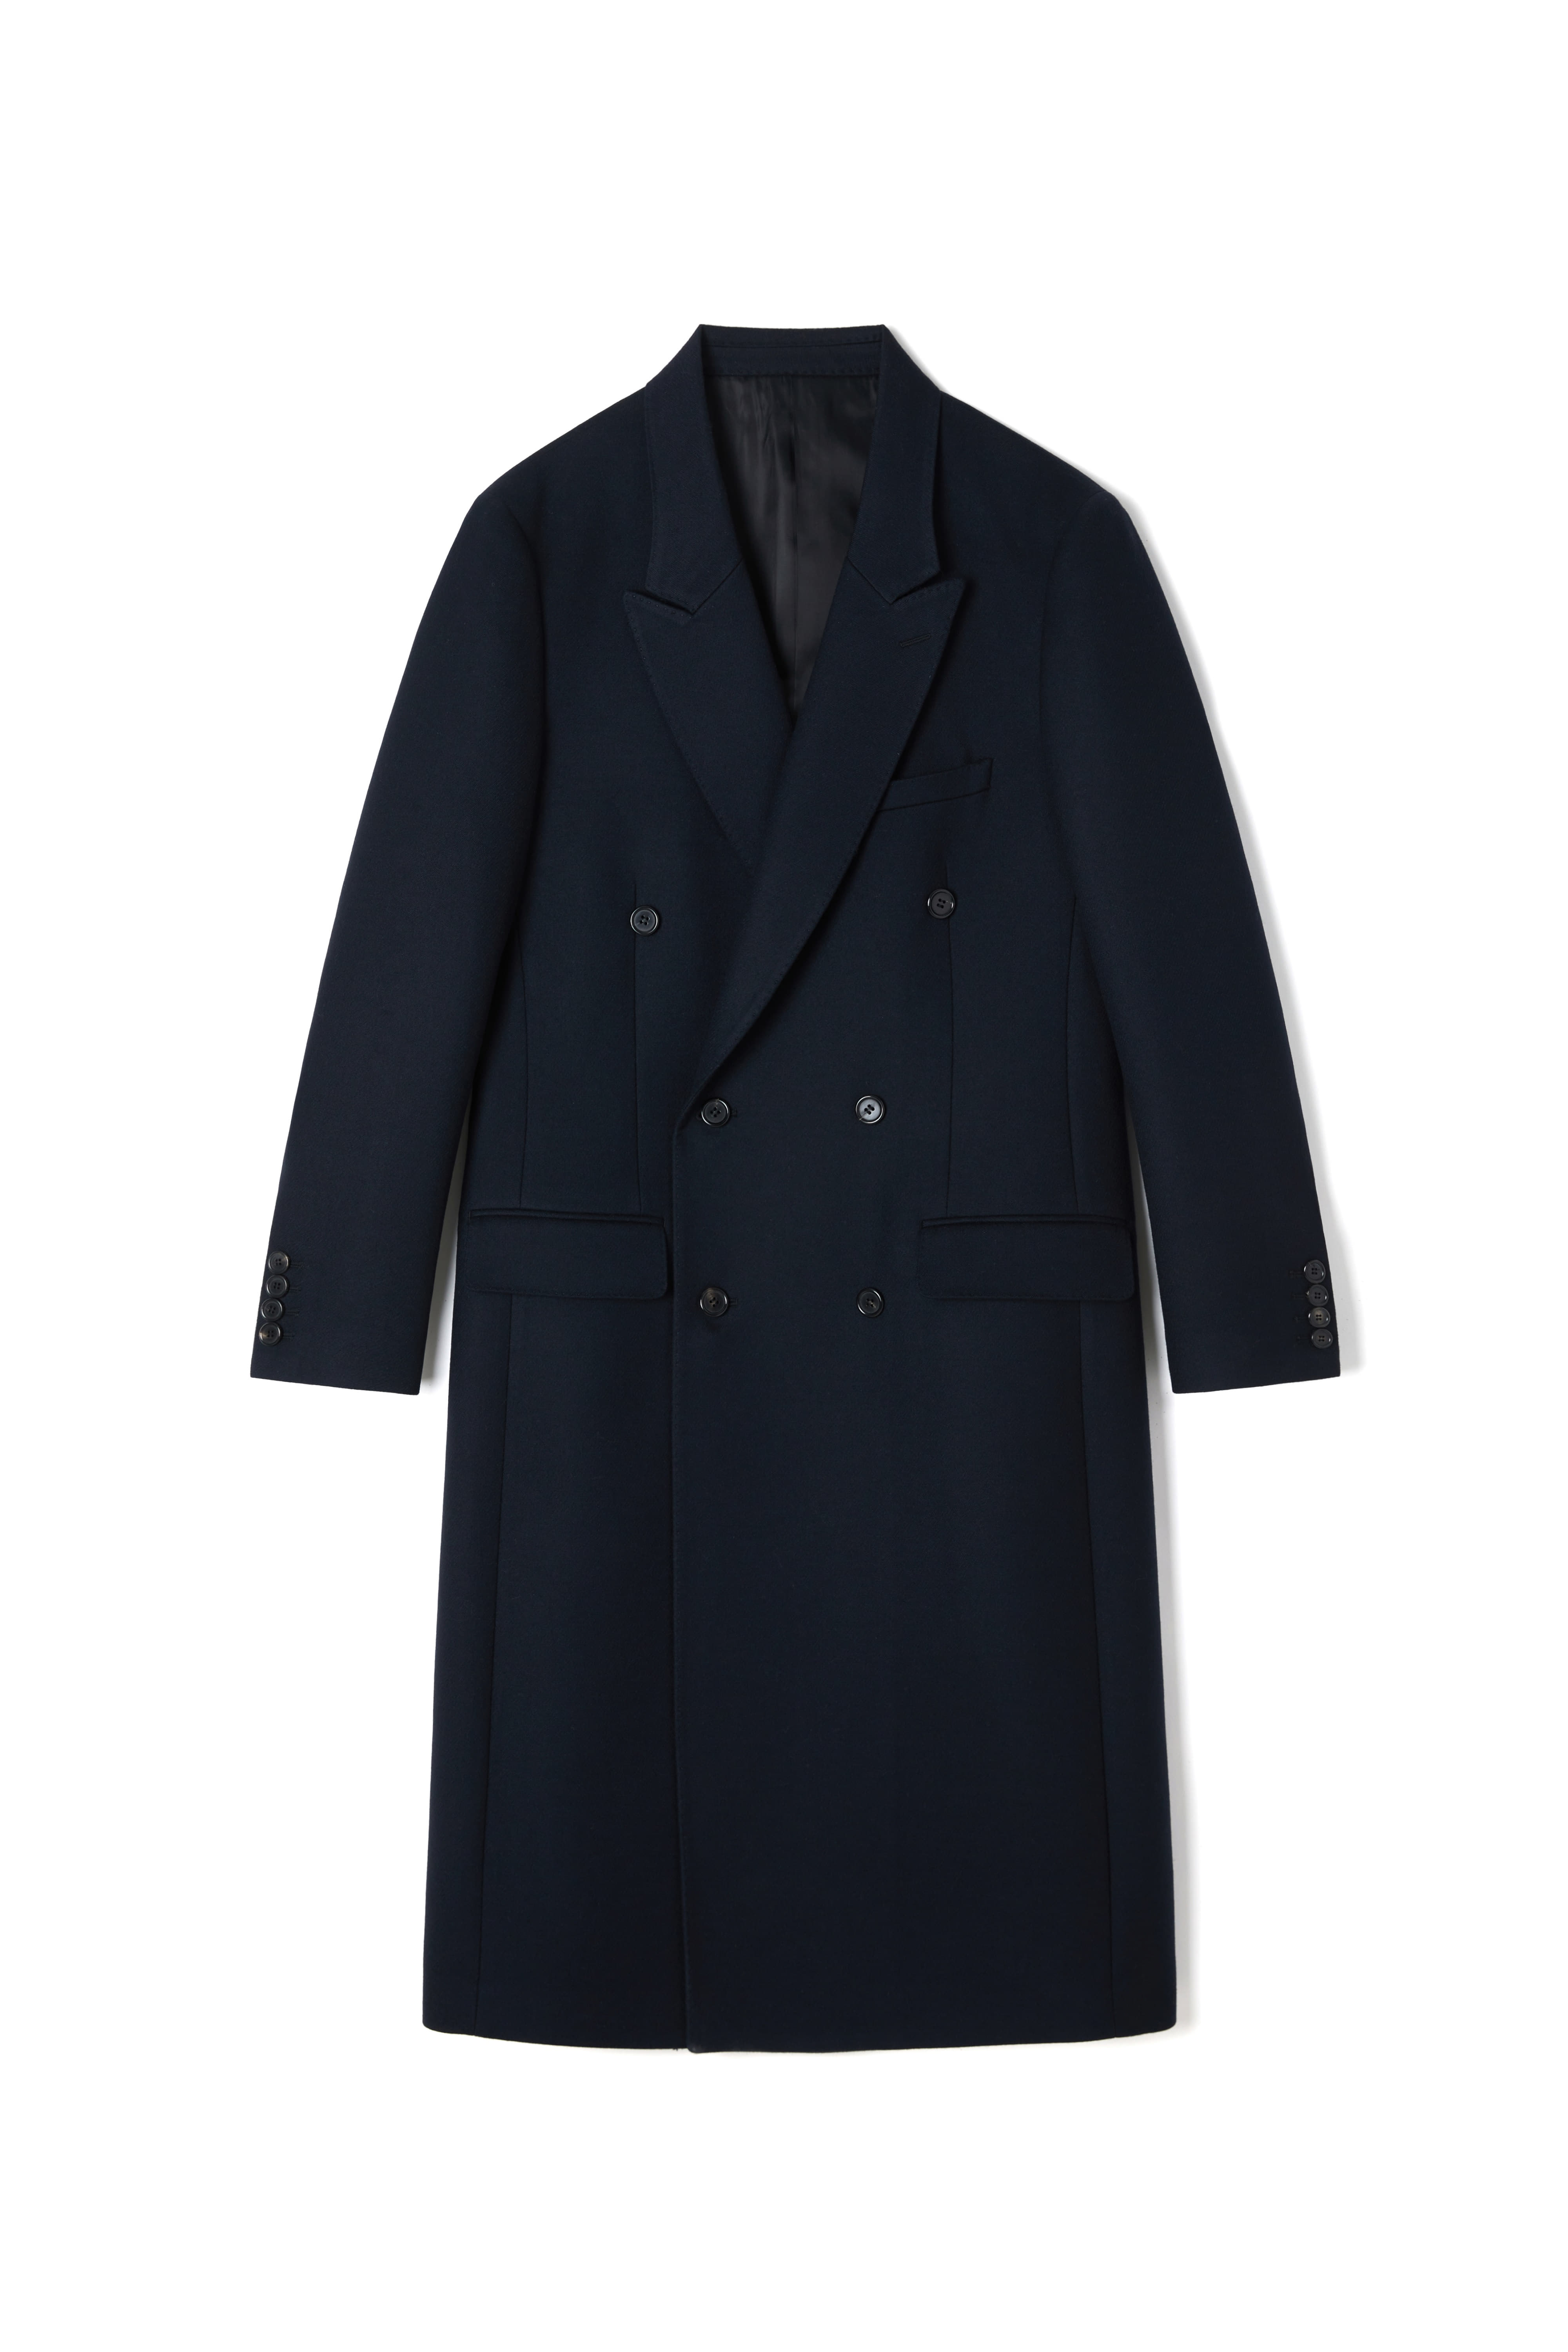 CIRCUSFALSE : DOUBLE-BREASTED CLASSIC COAT (NAVY WOOL)